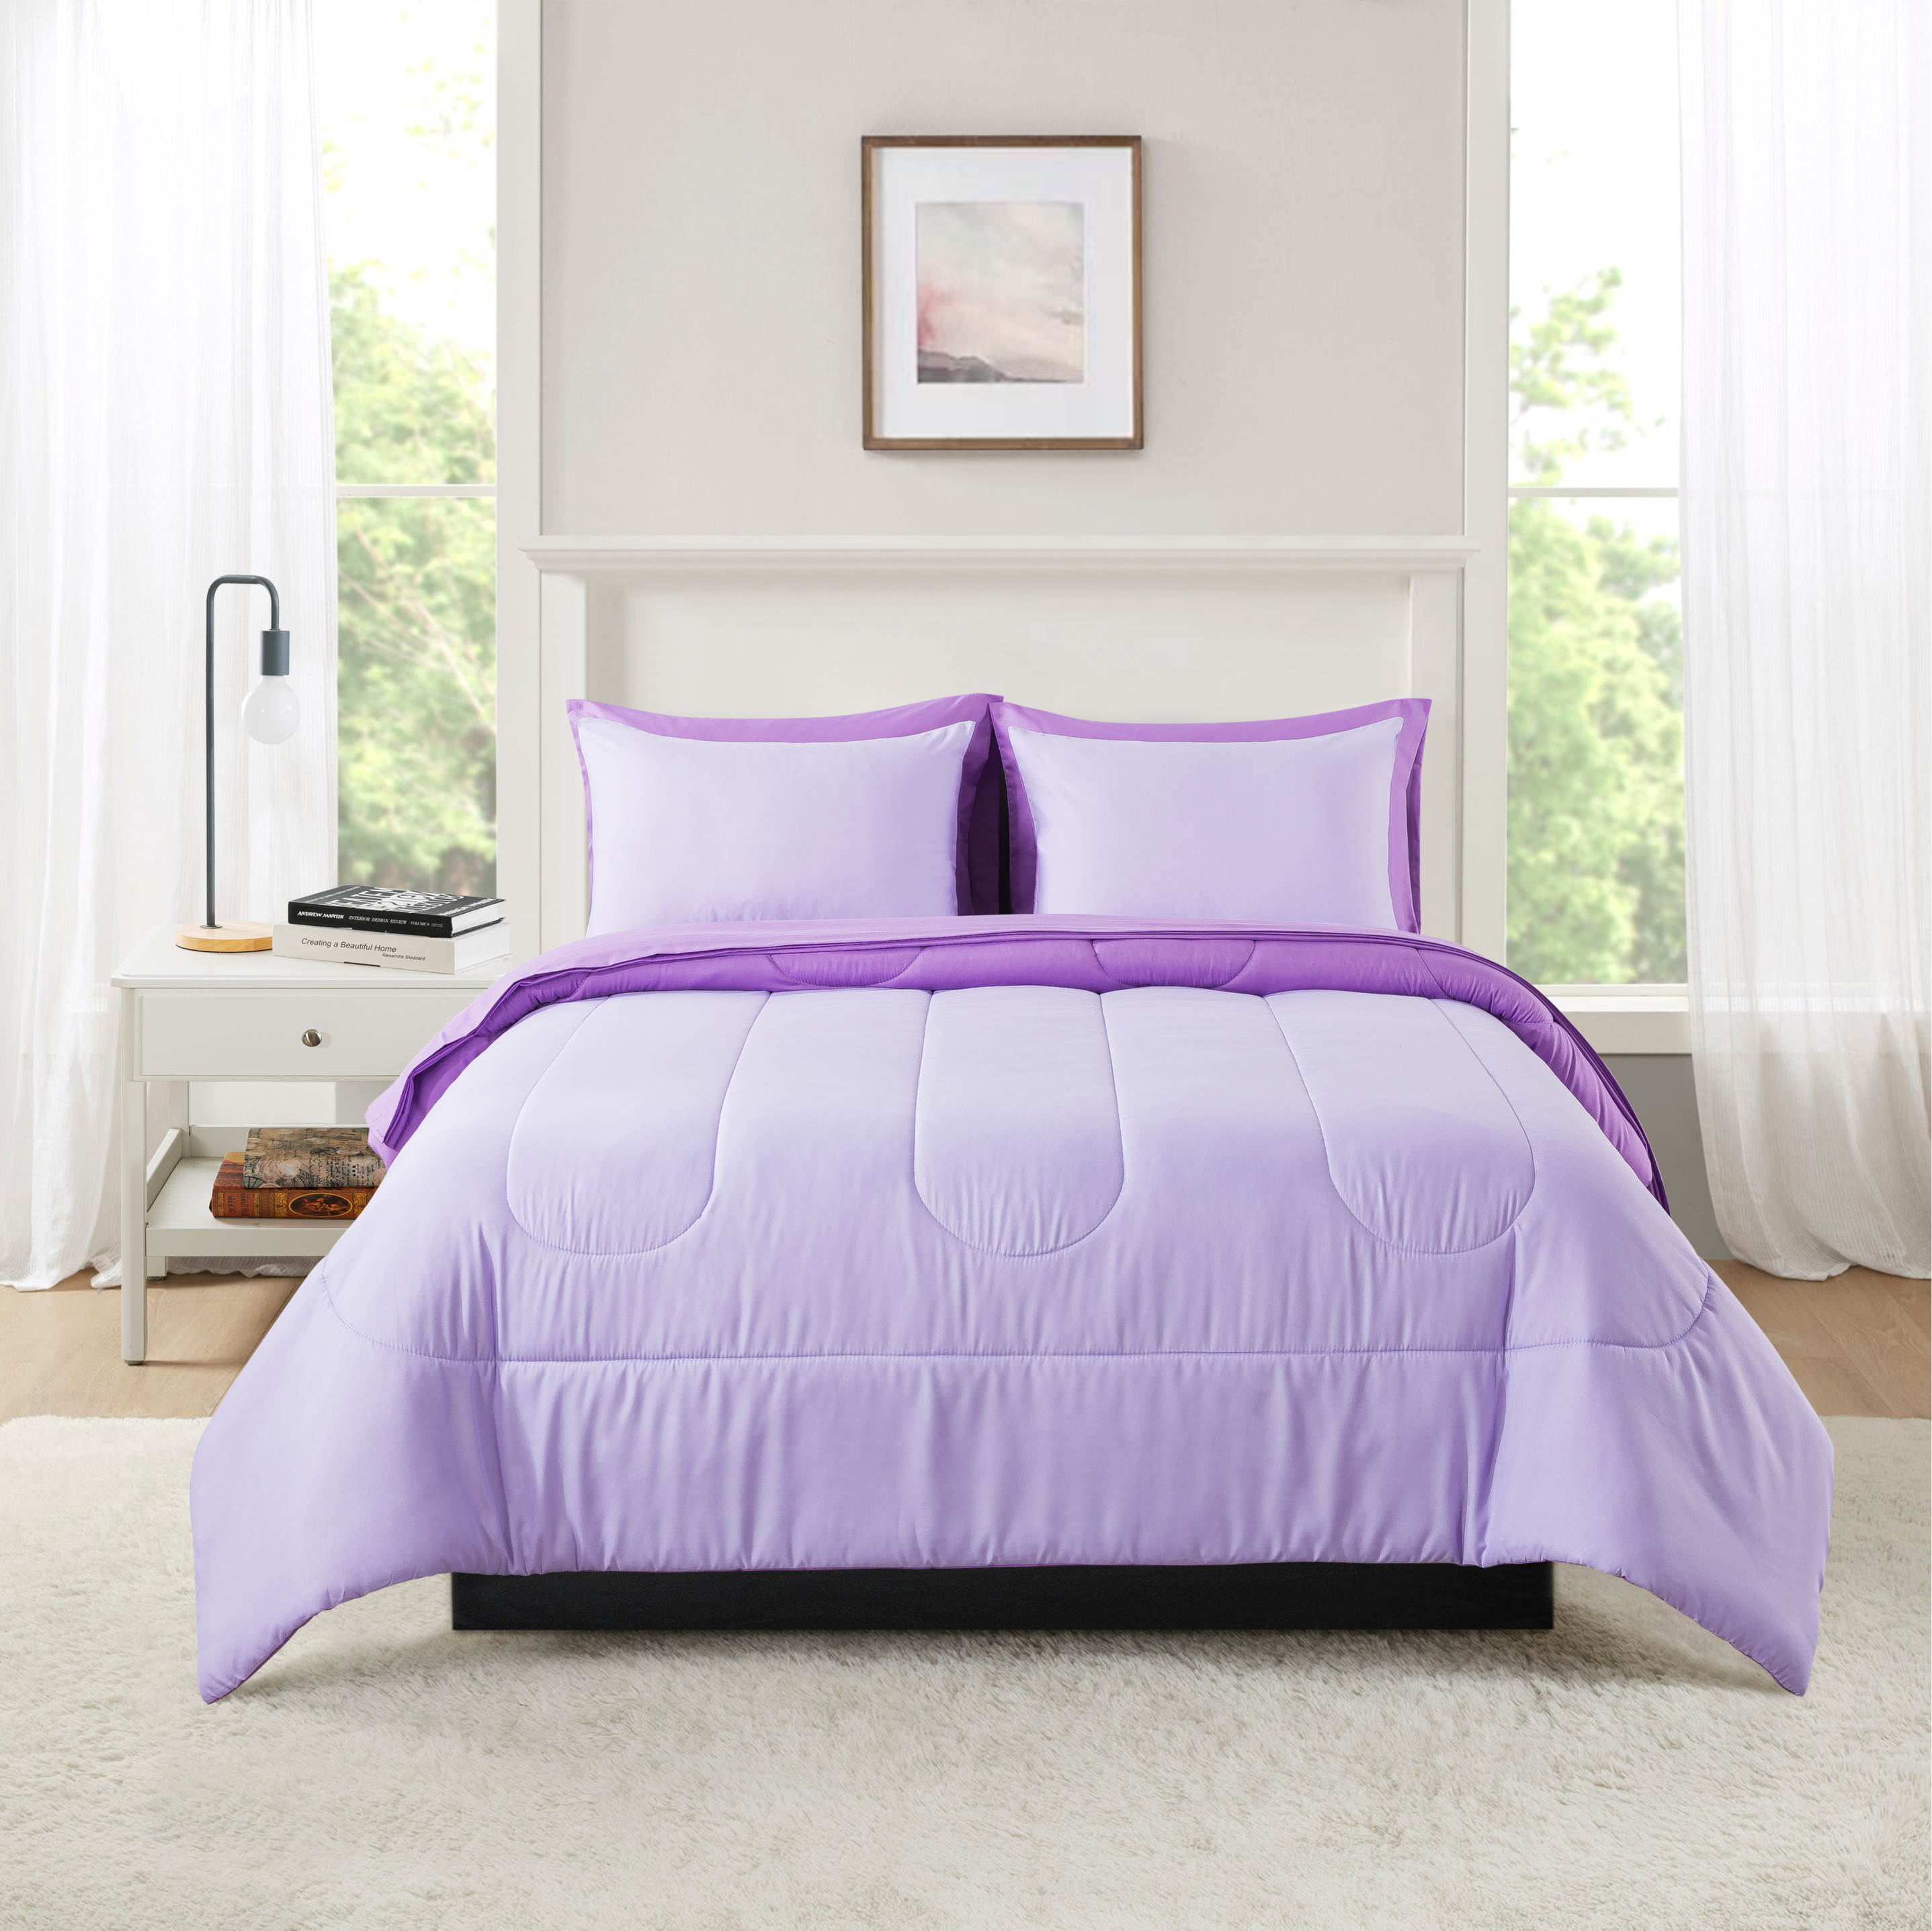 Mainstays Purple Reversible 7-Piece Bed in a Bag Comforter Set with Sheets, Queen - image 1 of 10